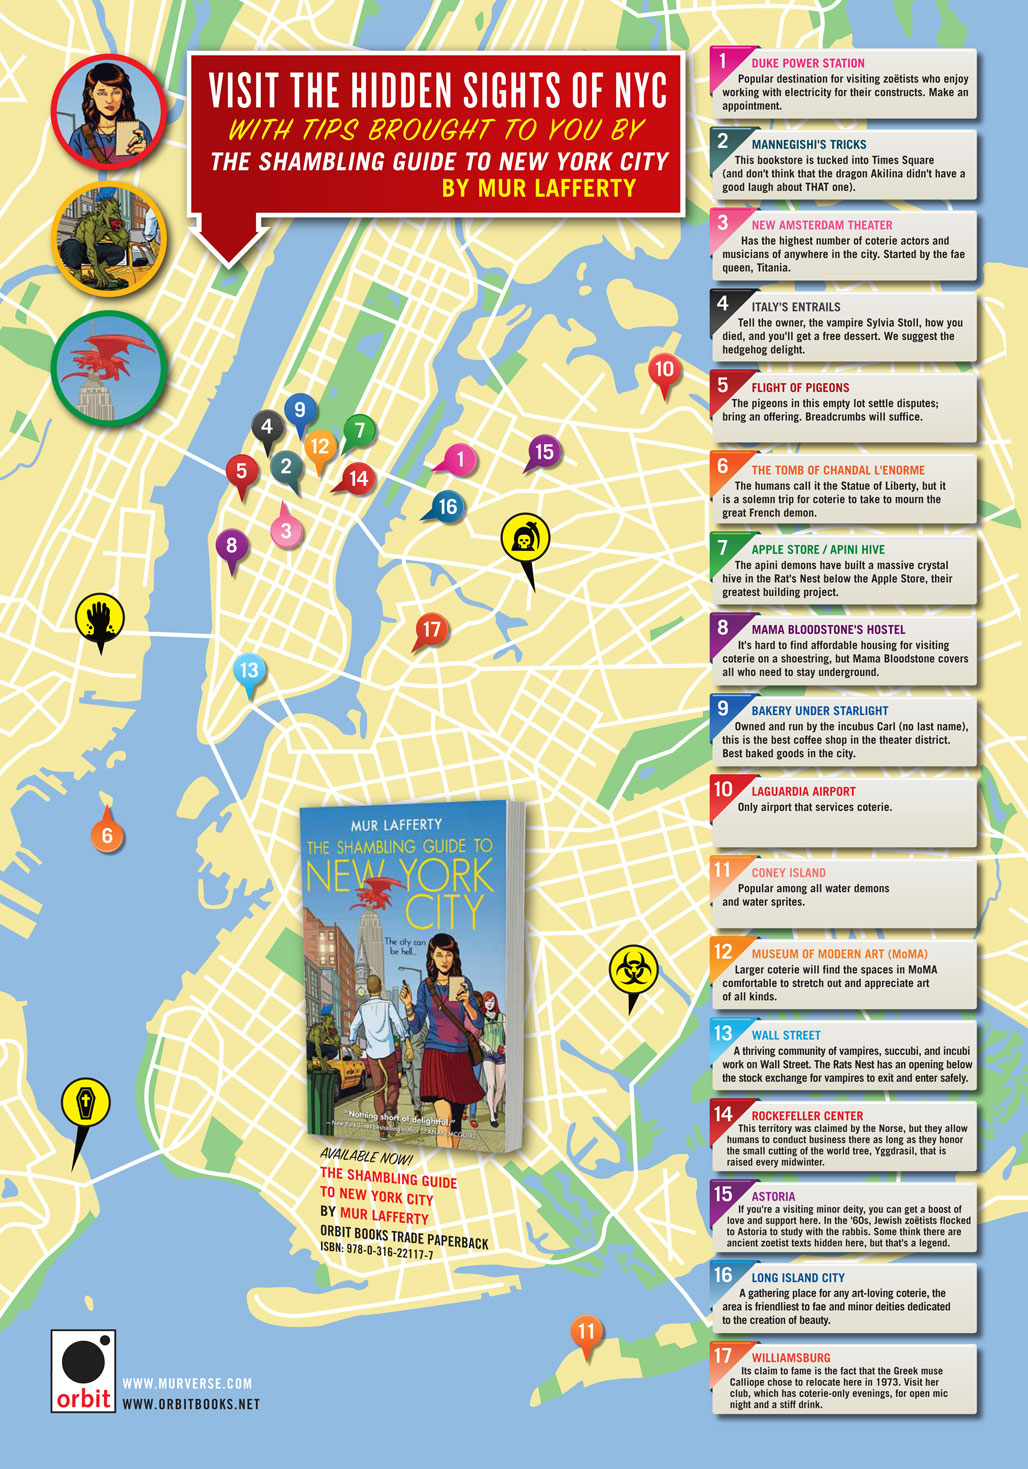 THE SHAMBLING GUIDE TO NEW YORK CITY - Click to enlarge!